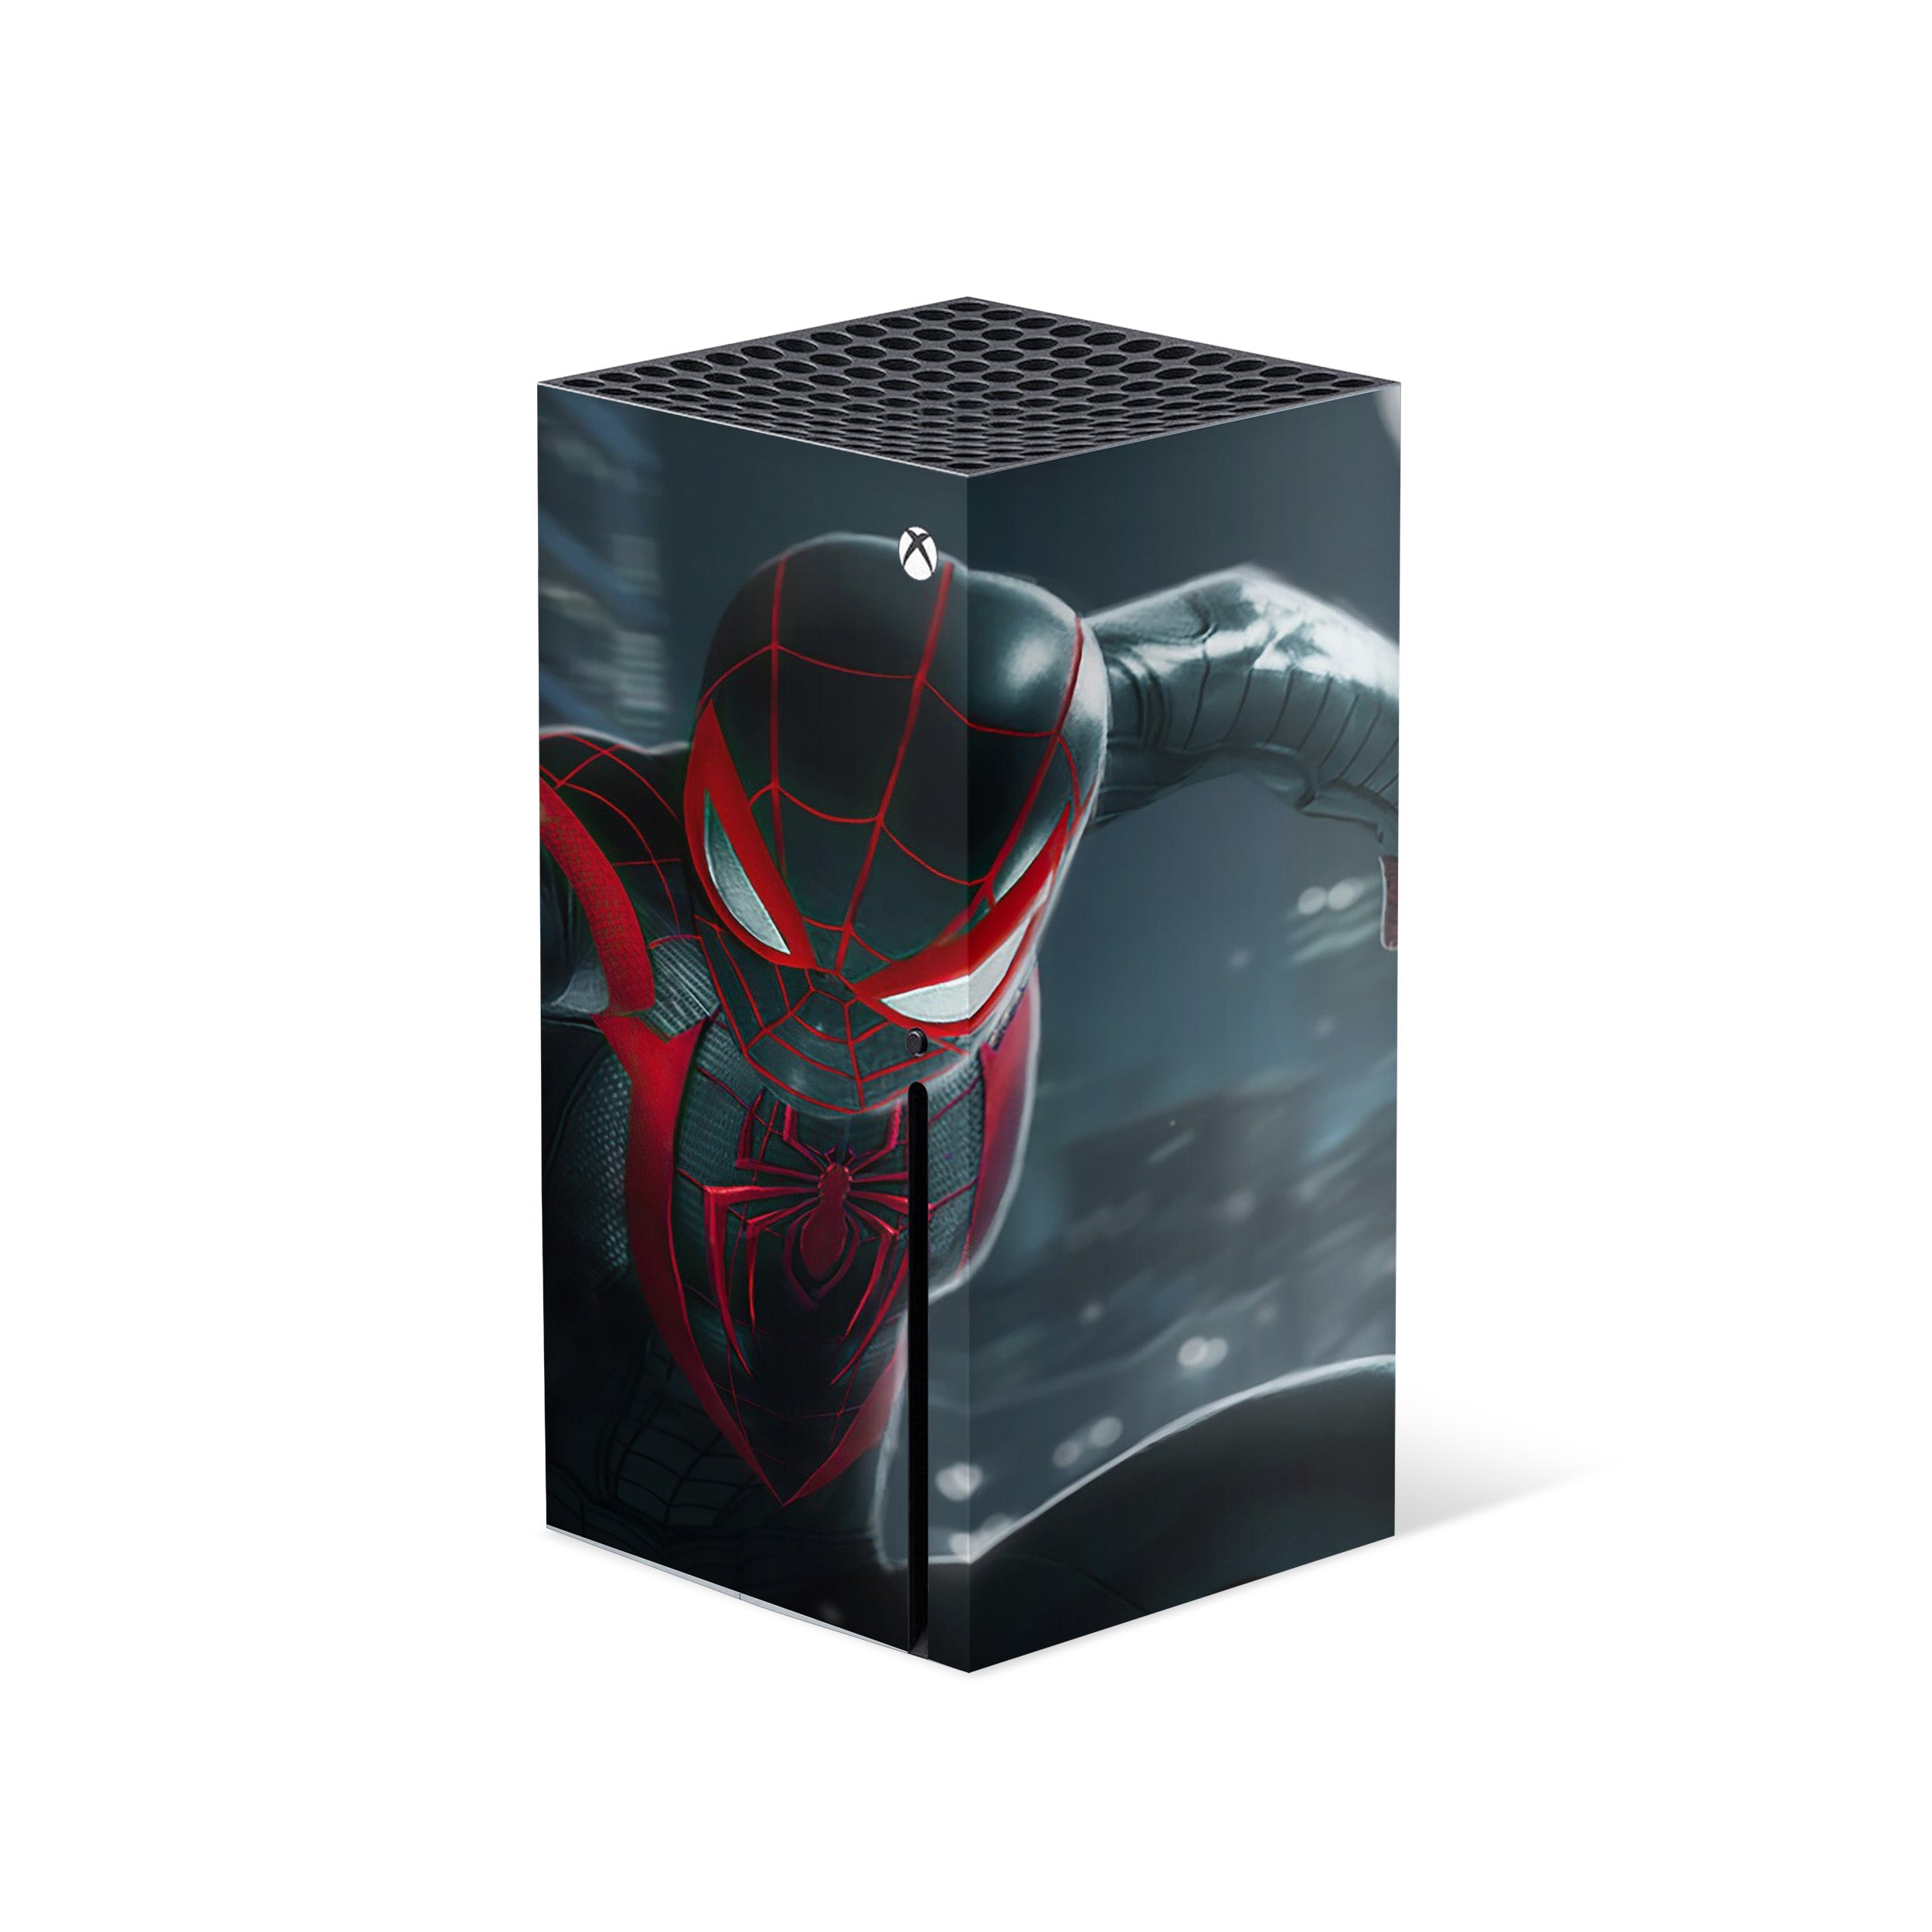 A video game skin featuring a Marvel Spiderman Miles Morales design for the Xbox Series X.